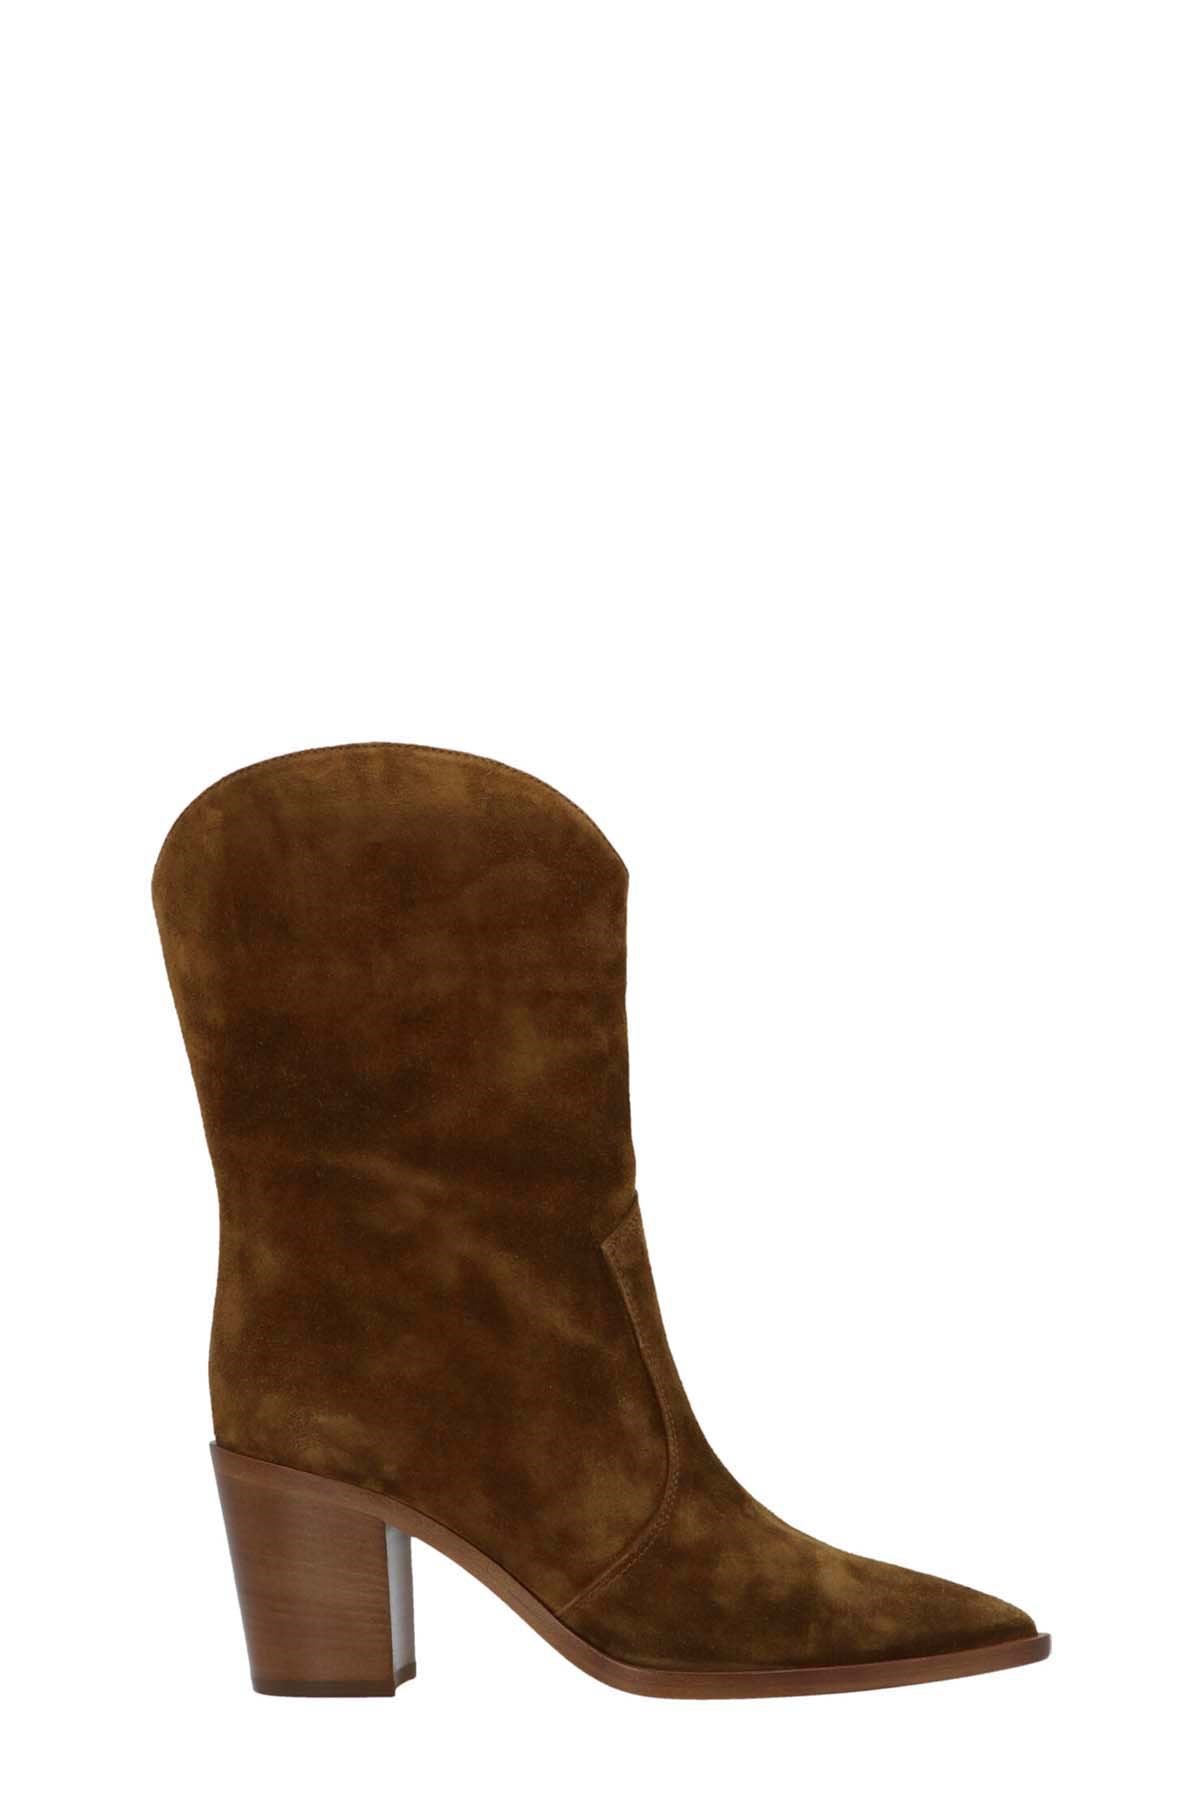 GIANVITO ROSSI 'Denver’ Cowboy Style Boots